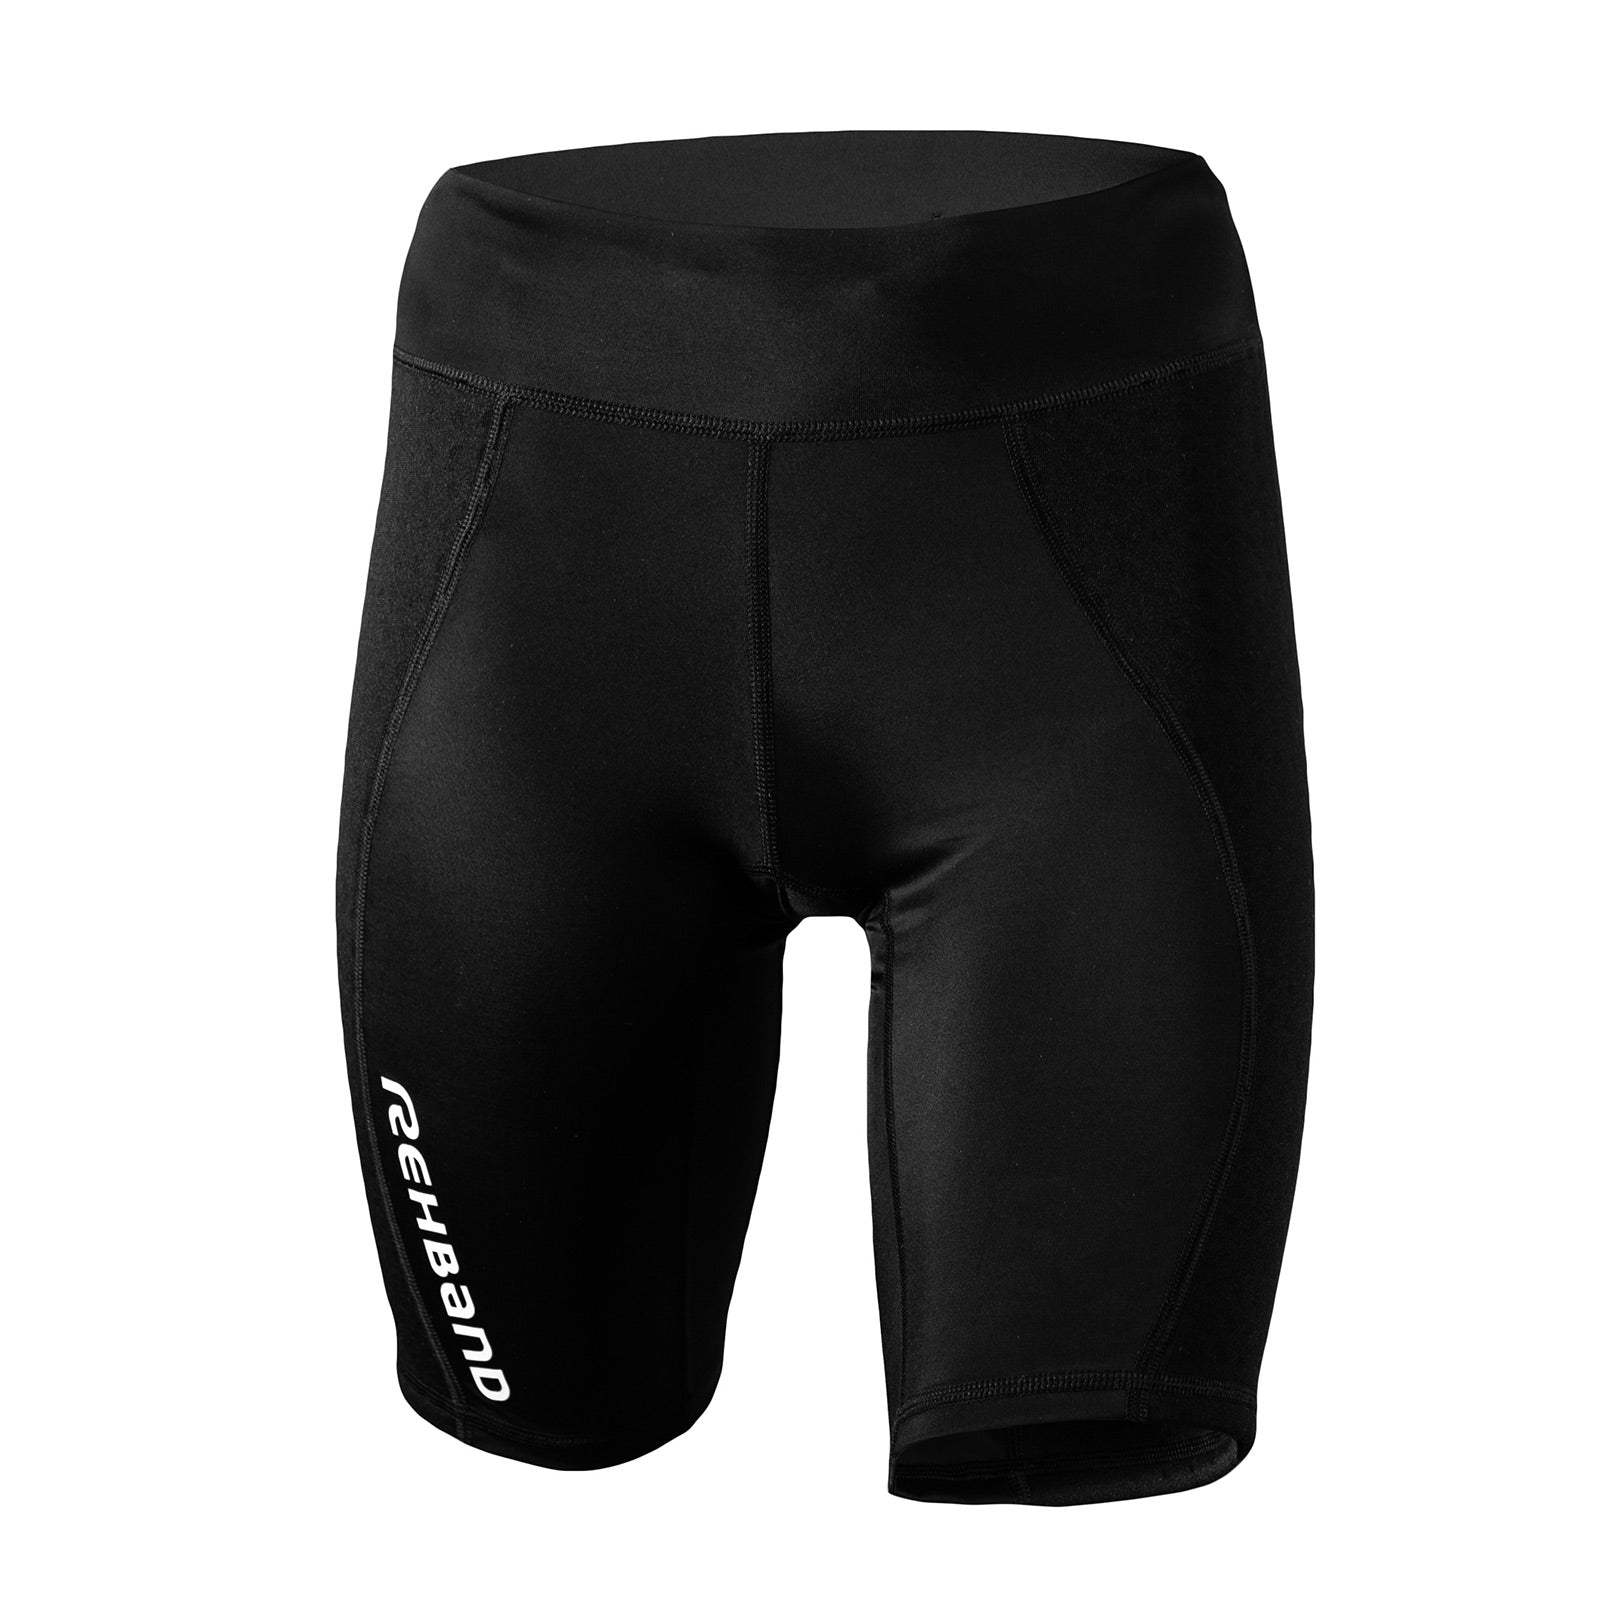 A black thermal zone shorts for women with a white Rehband lettering at the side